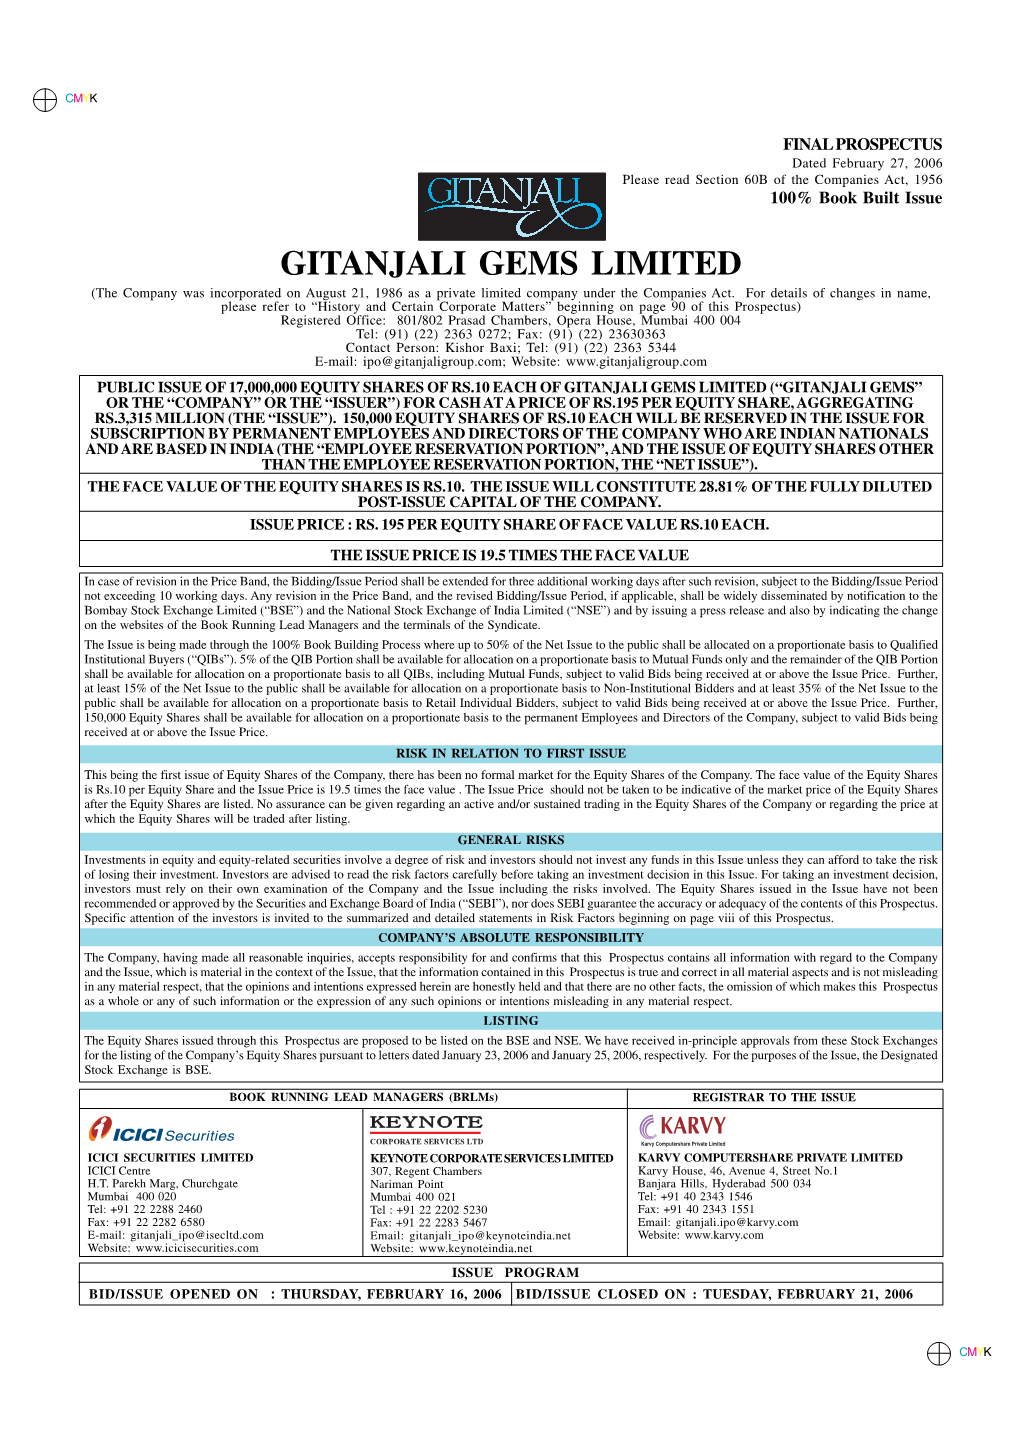 GITANJALI GEMS LIMITED (The Company Was Incorporated on August 21, 1986 As a Private Limited Company Under the Companies Act